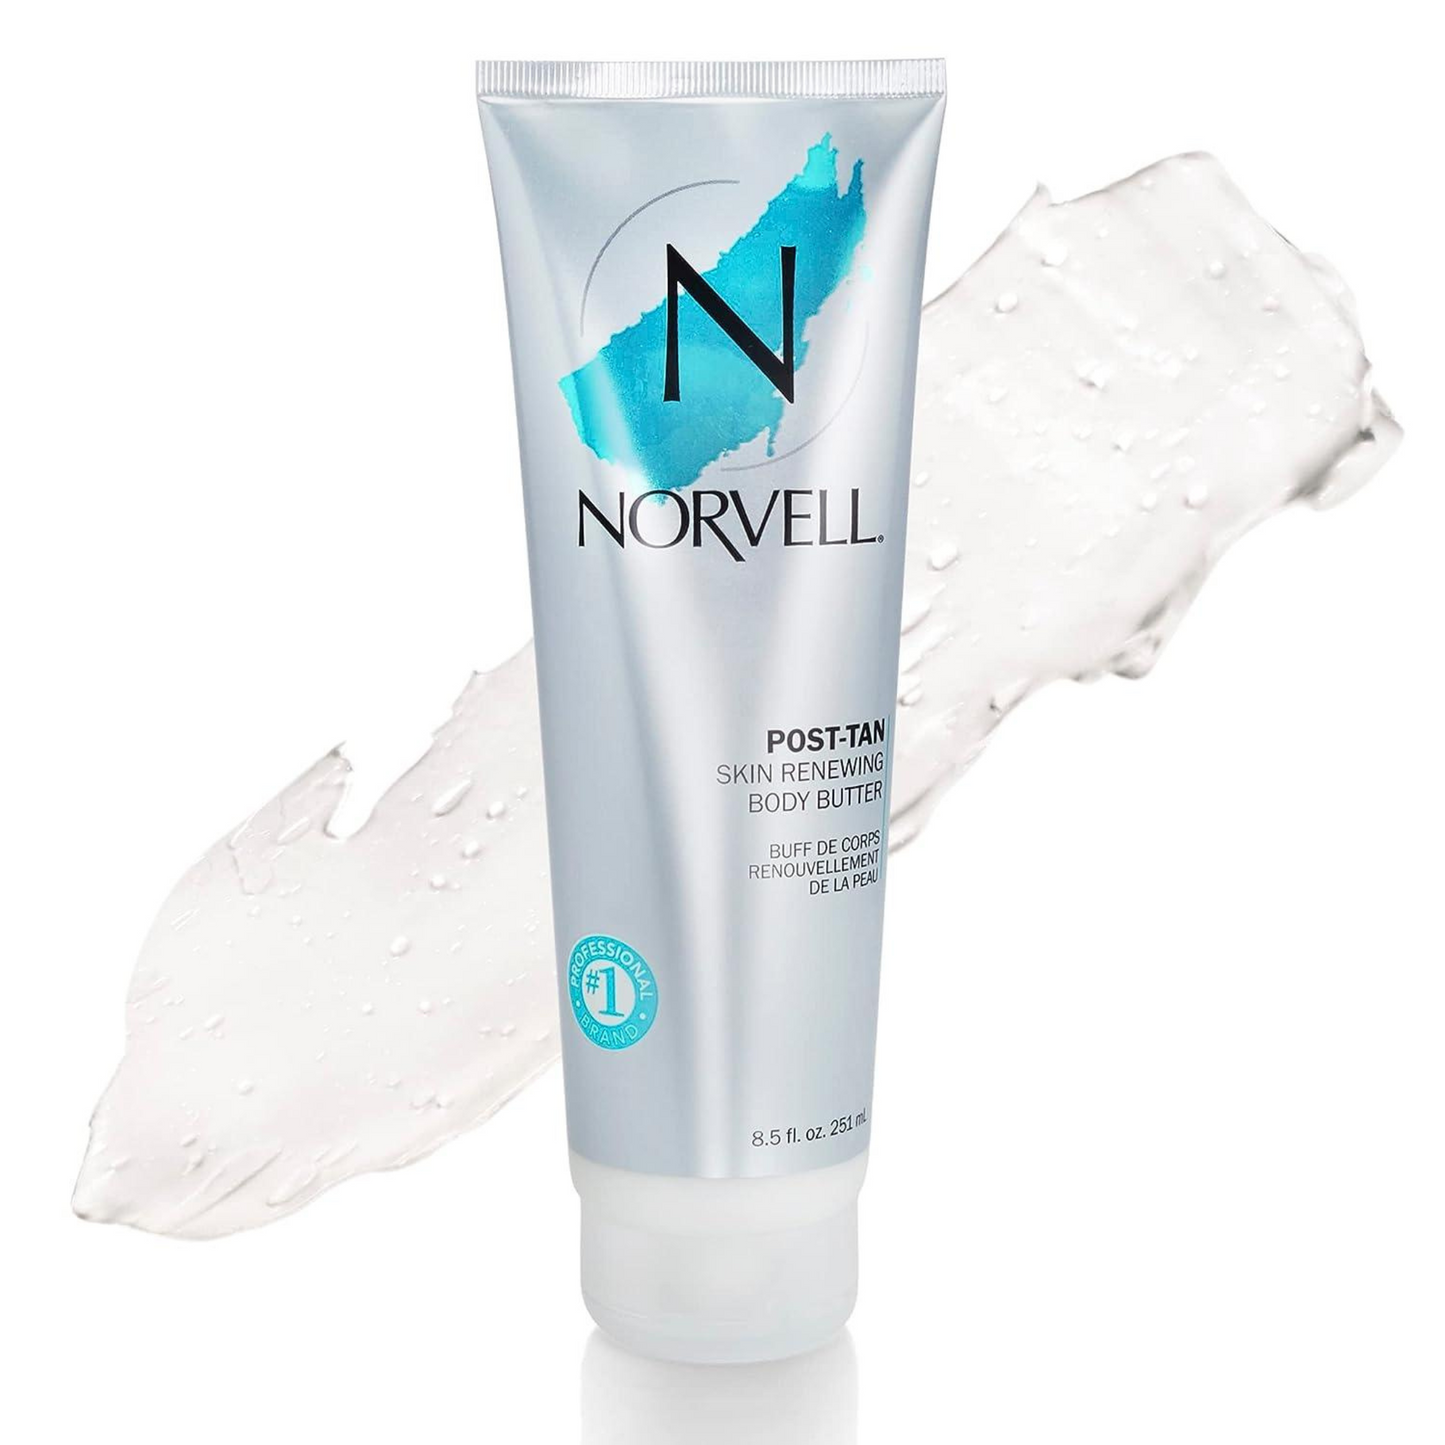 Norvell Post-Tan Body Butter Travel Size